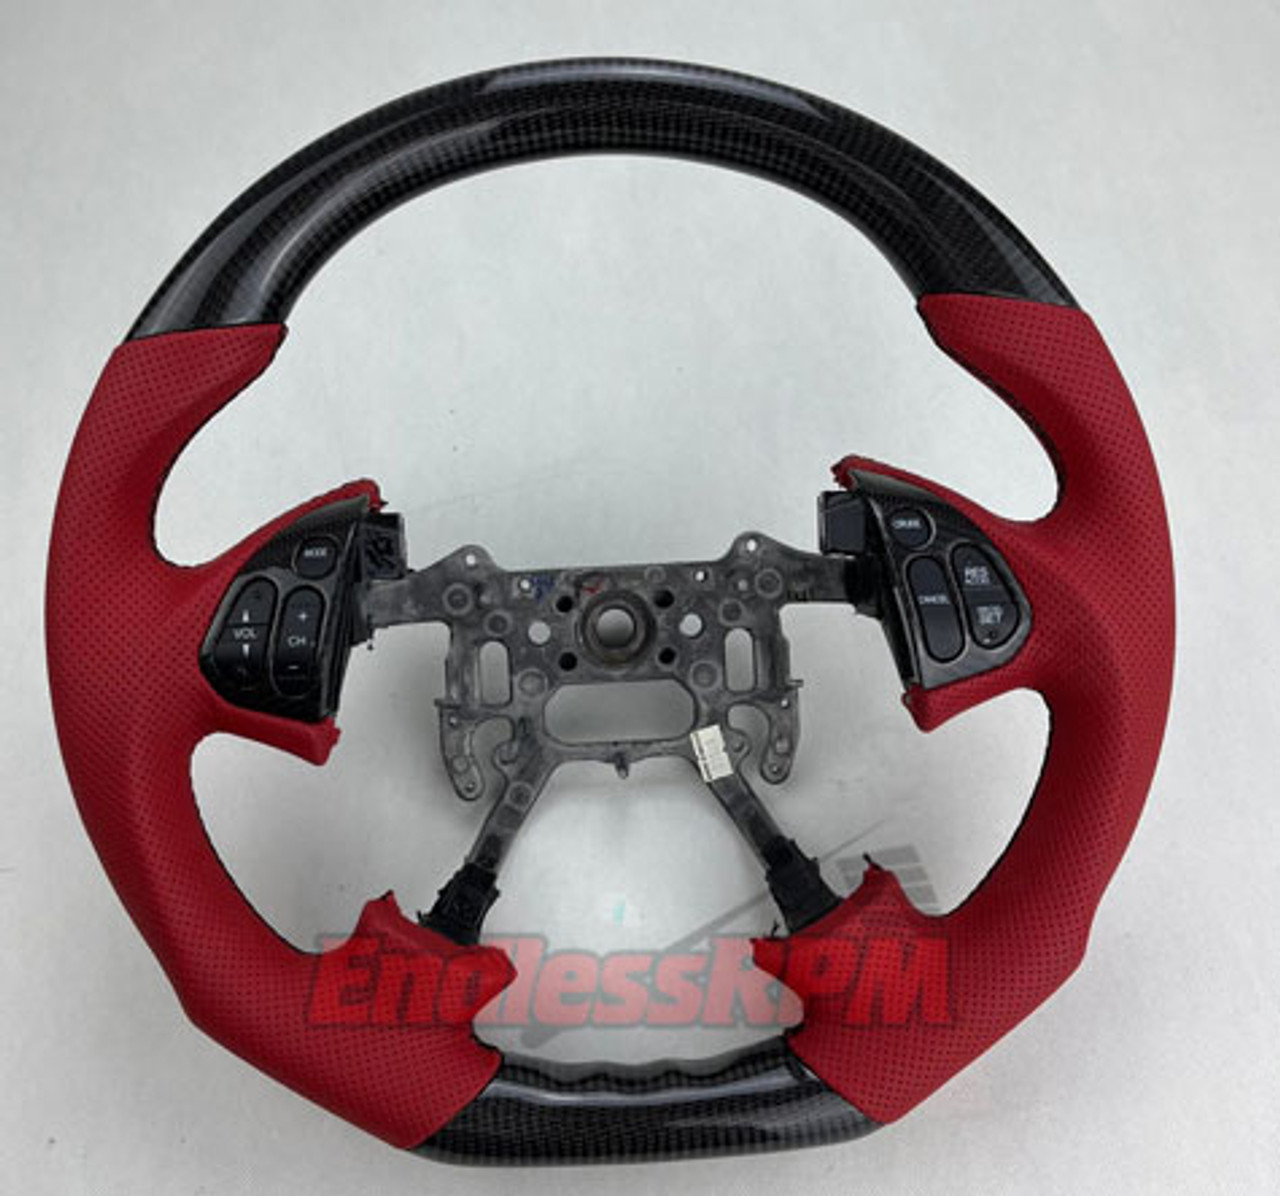  Acura TL 2004-06 - Carbon Fiber steering wheel WITH buttons ( as pictured )